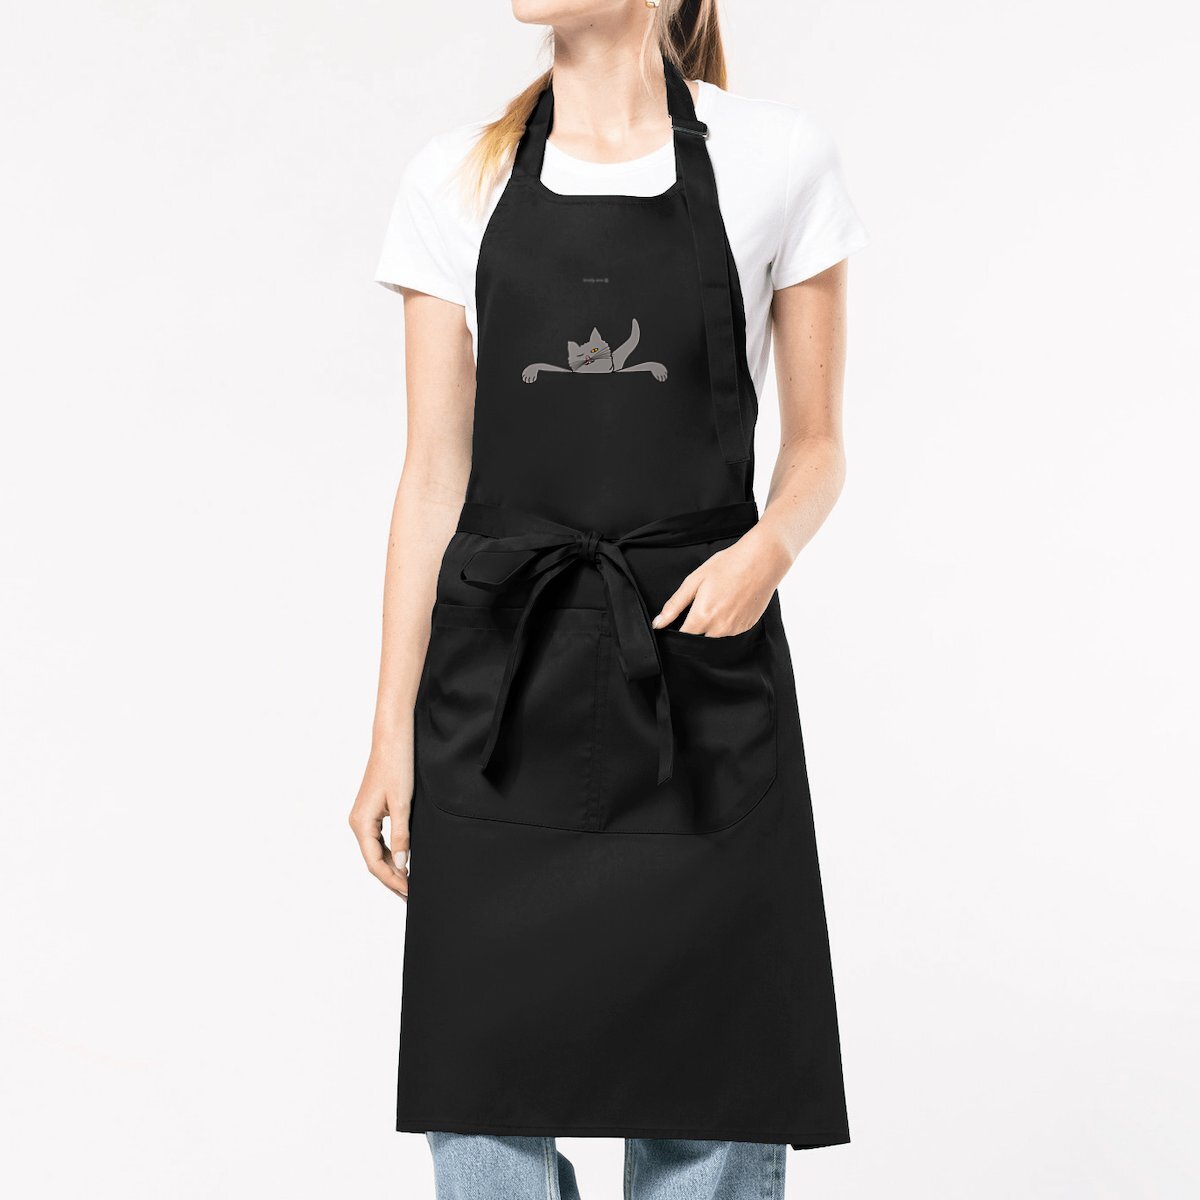 Cat looks over It on a Apron